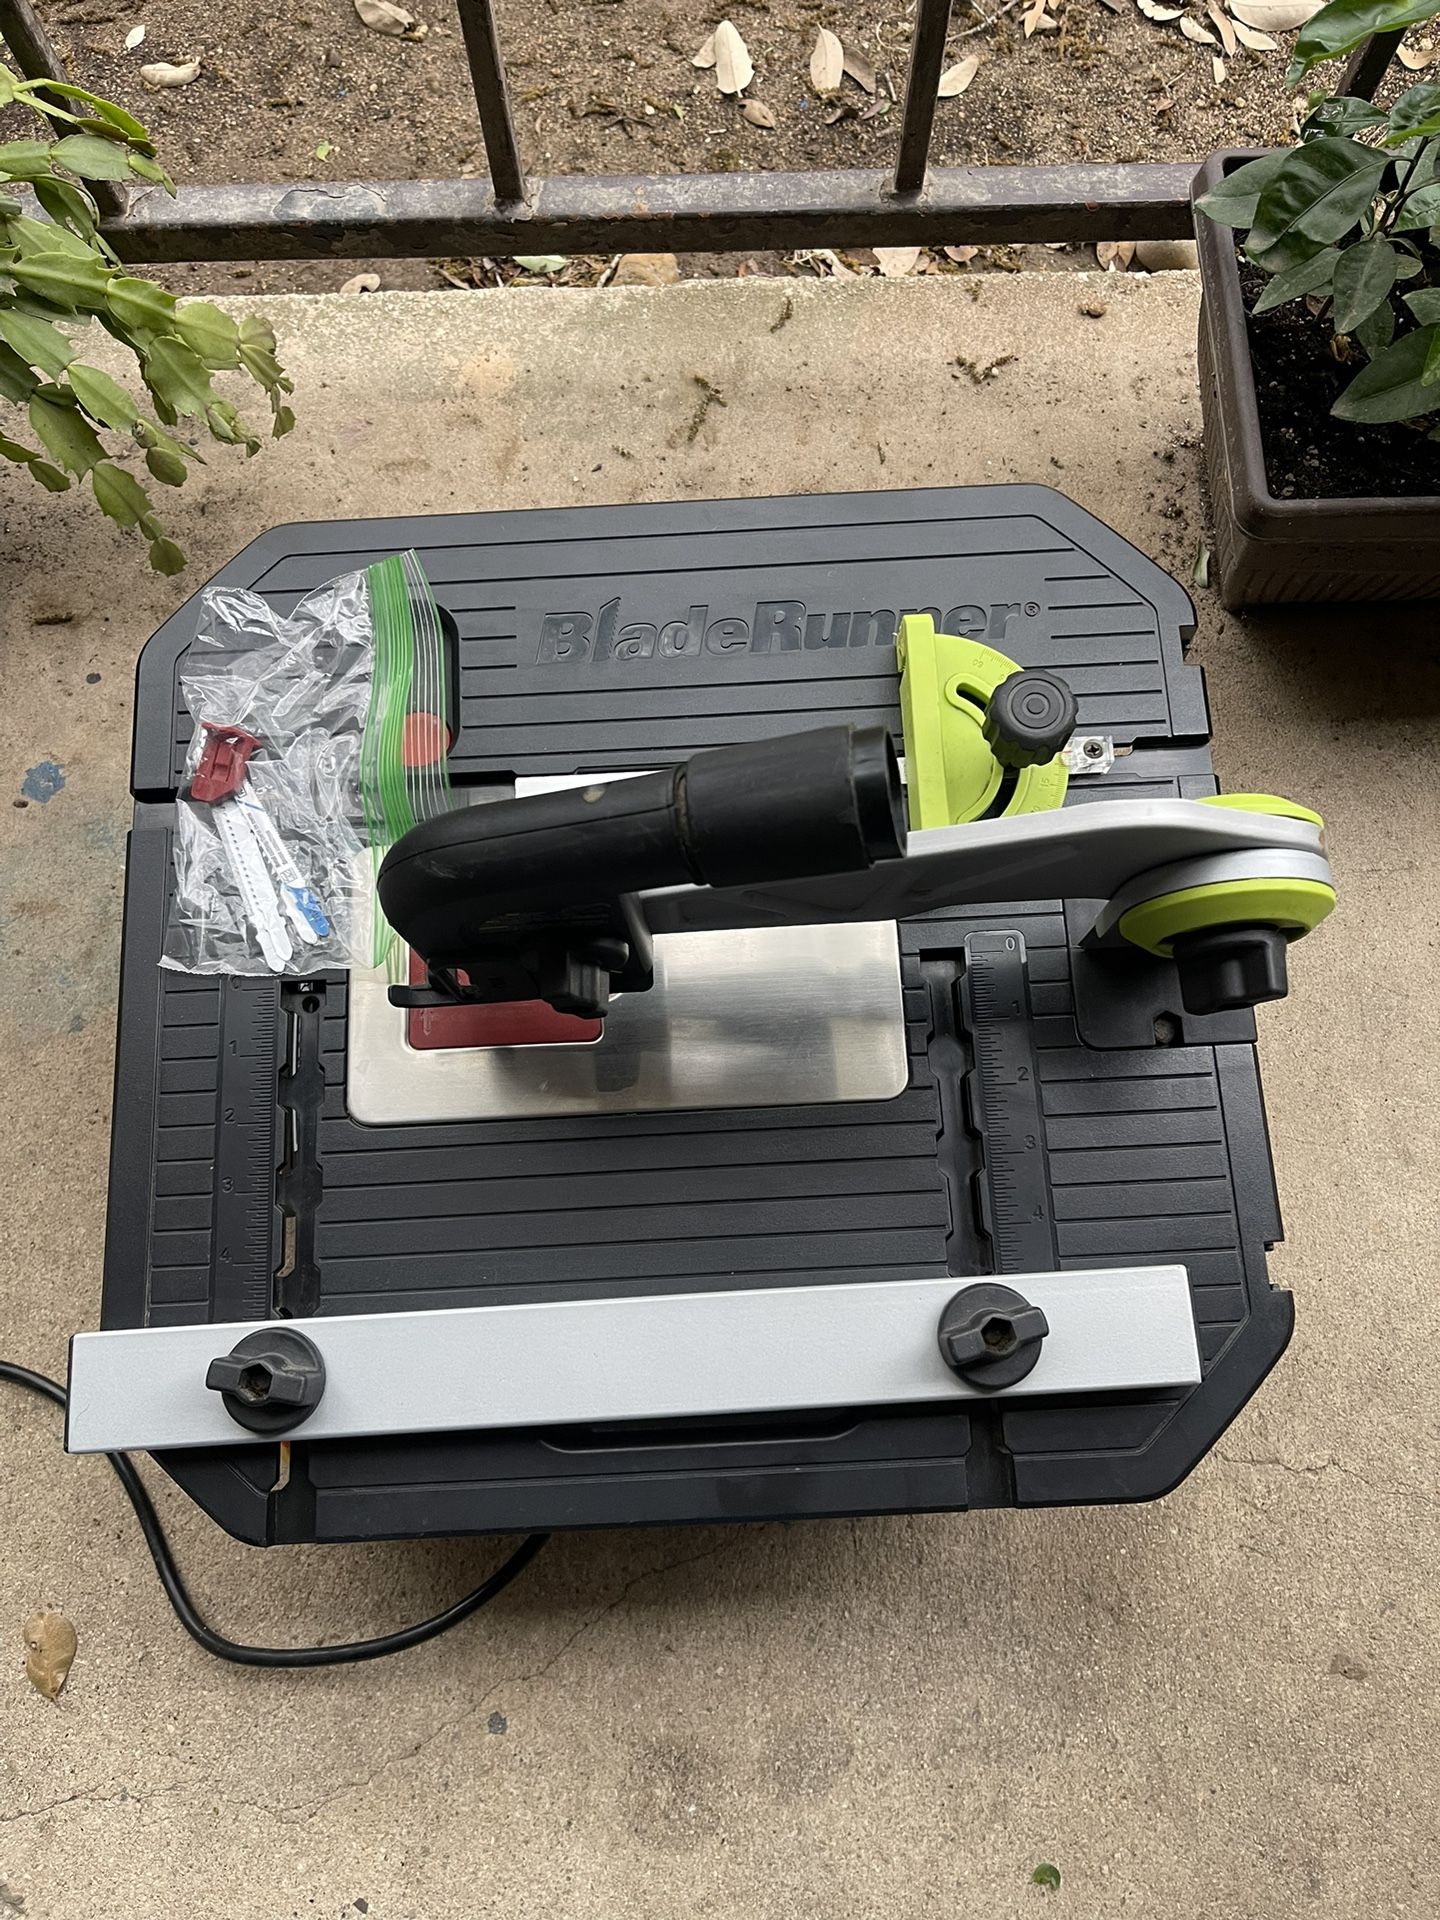 Rockwell RK7323 BladeRunner X2 Portable Tabletop Saw $100